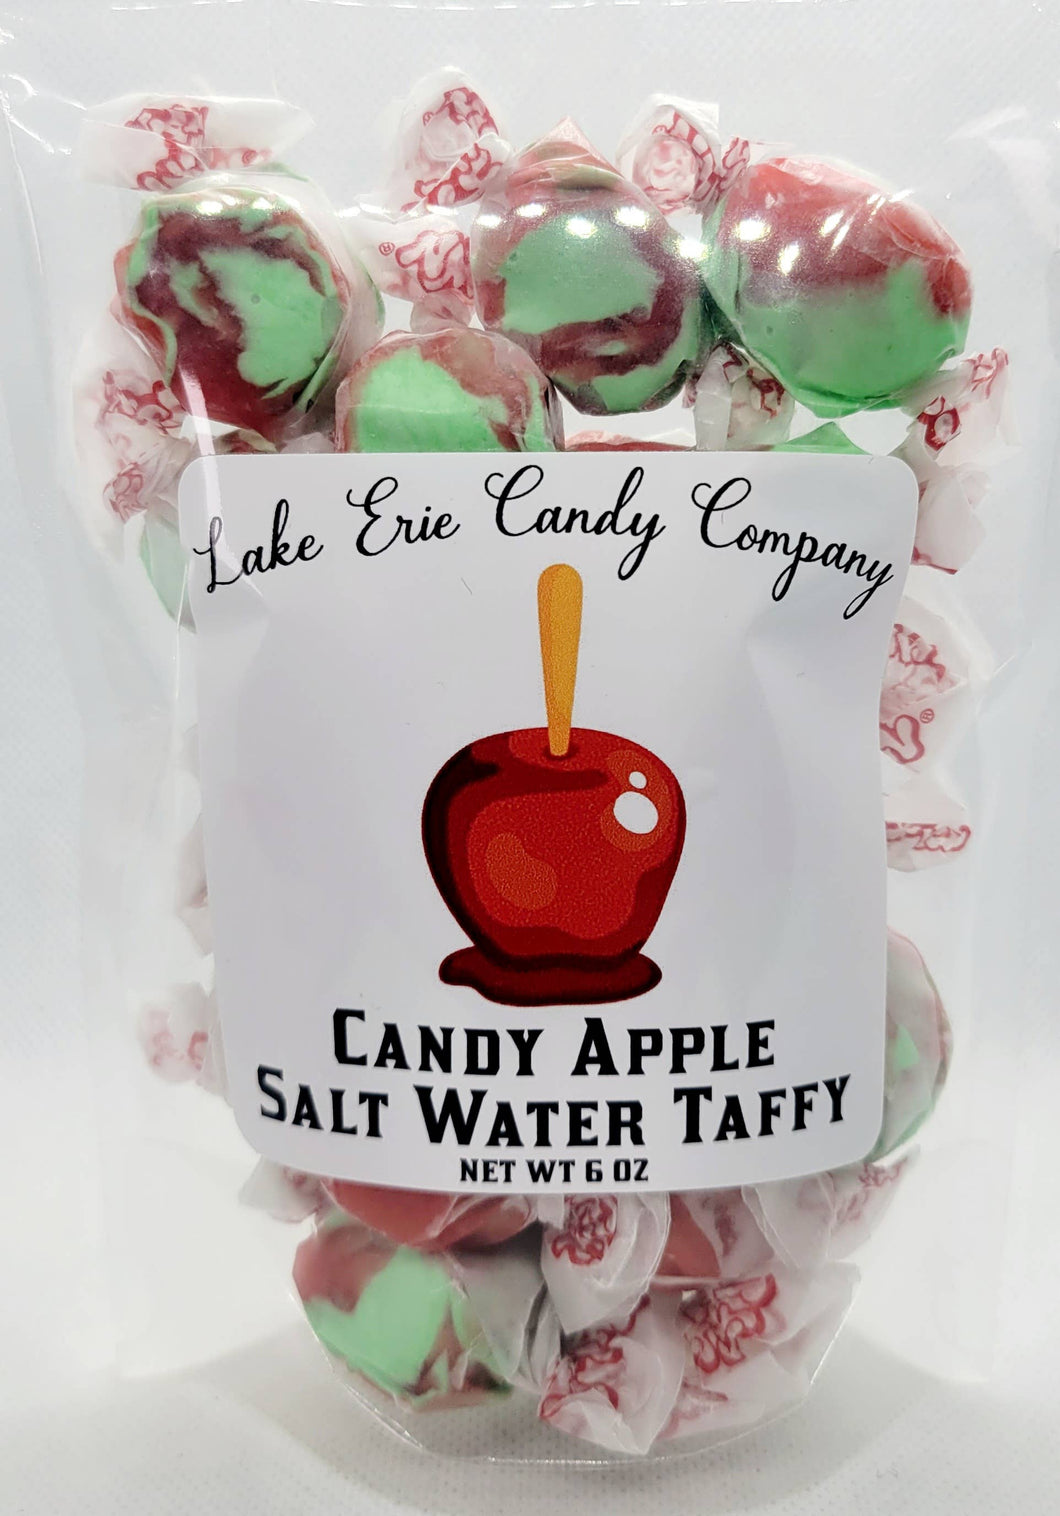 Lake Erie Candy Company - Candy Apple Salt Water Taffy